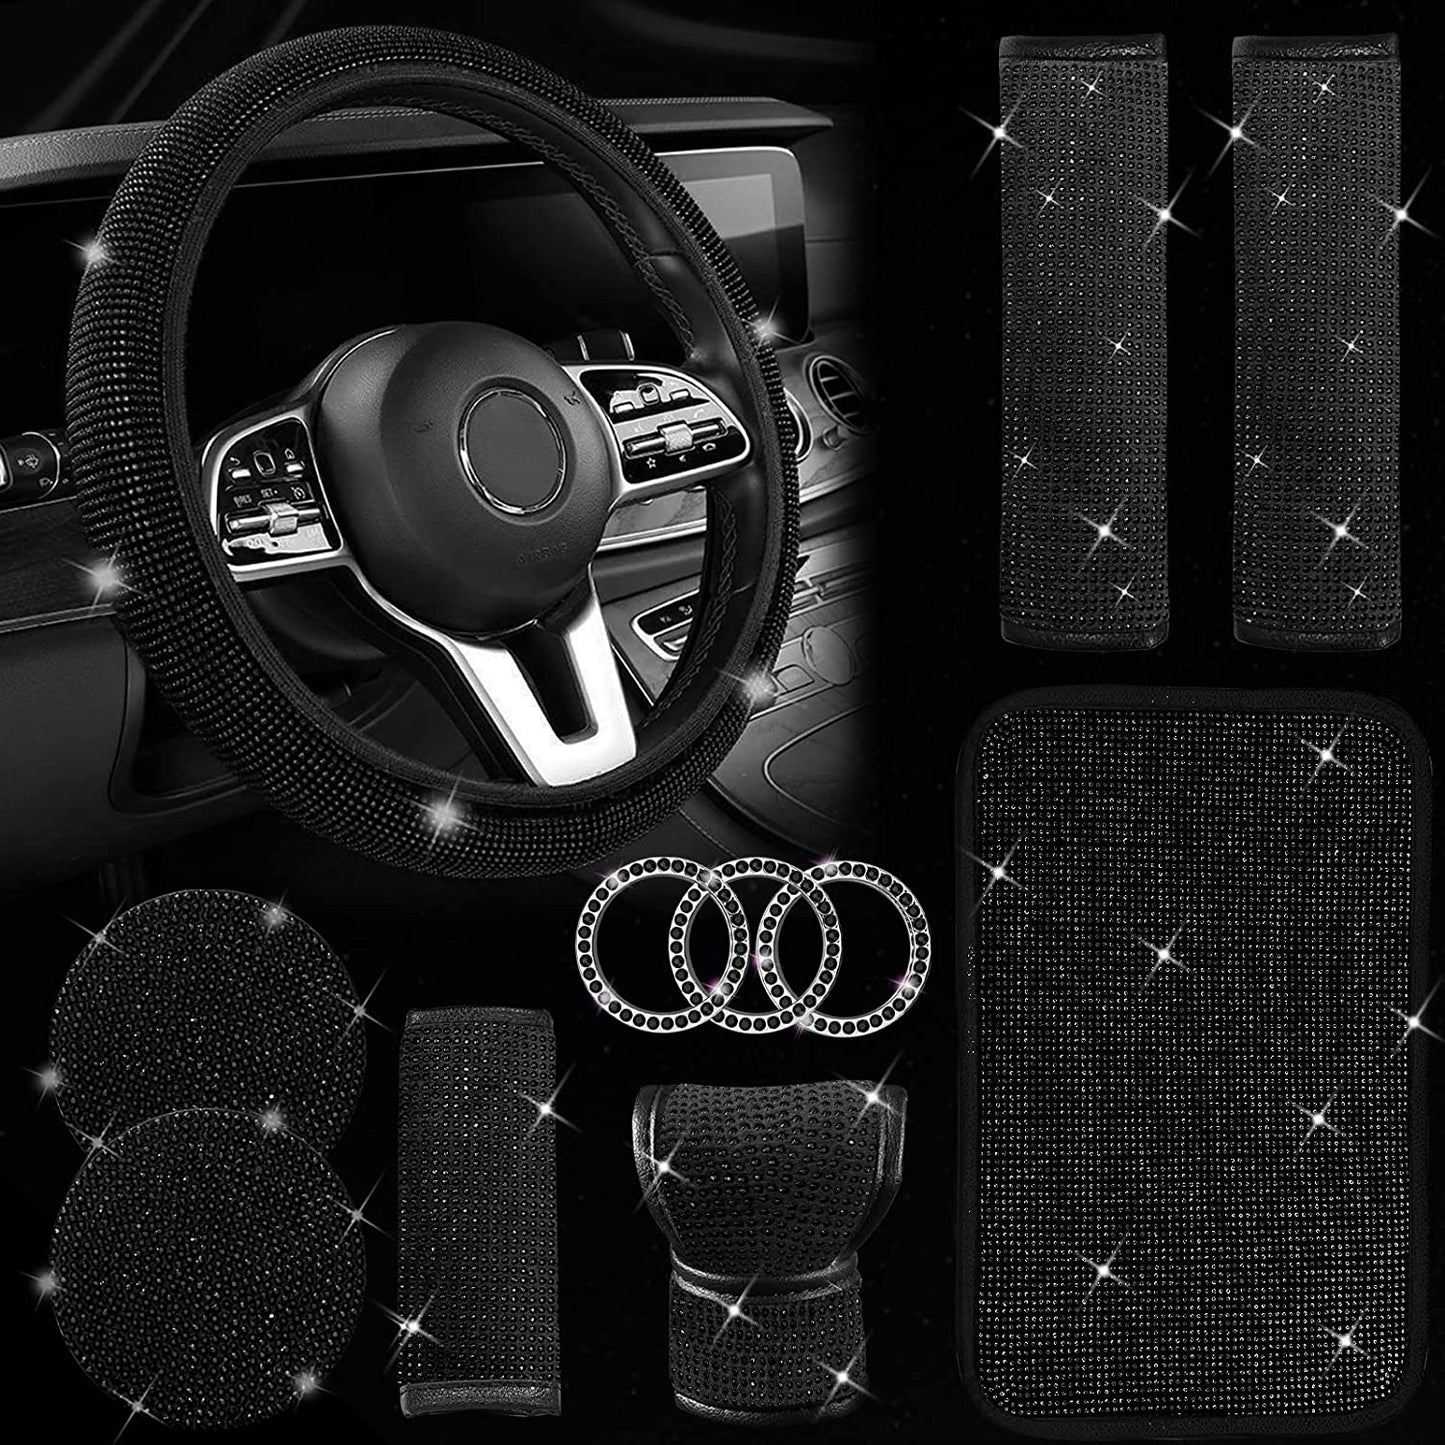 11 Pcs Bling Car Accessories Set,Bling Car Accessories Set for Women, Bling Steering Wheel Cover for Women Universal Fit 15 Inch, Rhinestone Center Console Cover (Pink)